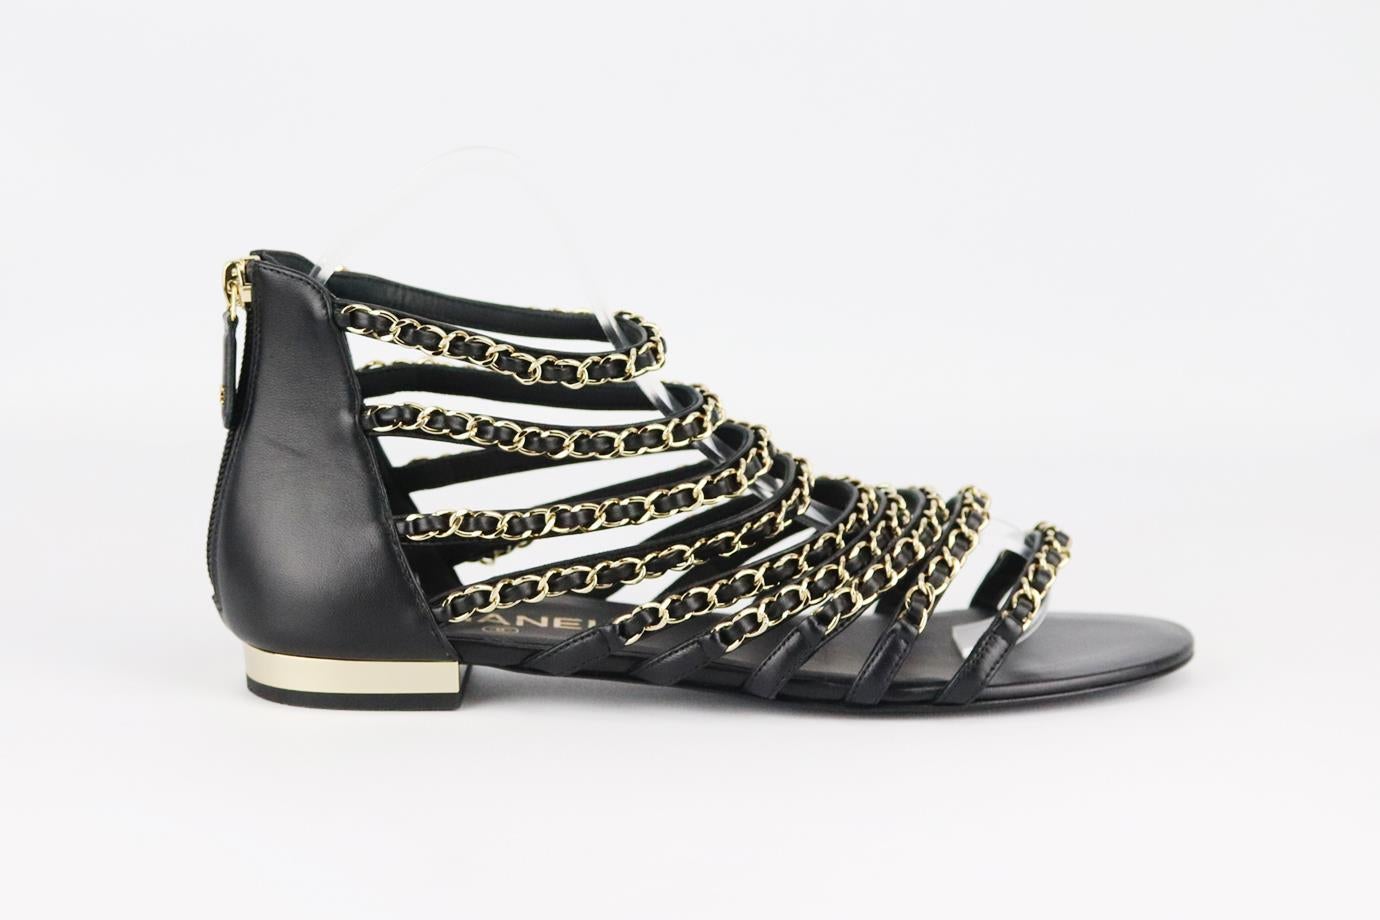 Chanel 2018 chain detailed leather sandals. Black. Zip fastening at back. Does not come with box or dustbag. Size: EU 39 (UK 6, US 9). Insole: 10 in. Heel: 0.5 in
